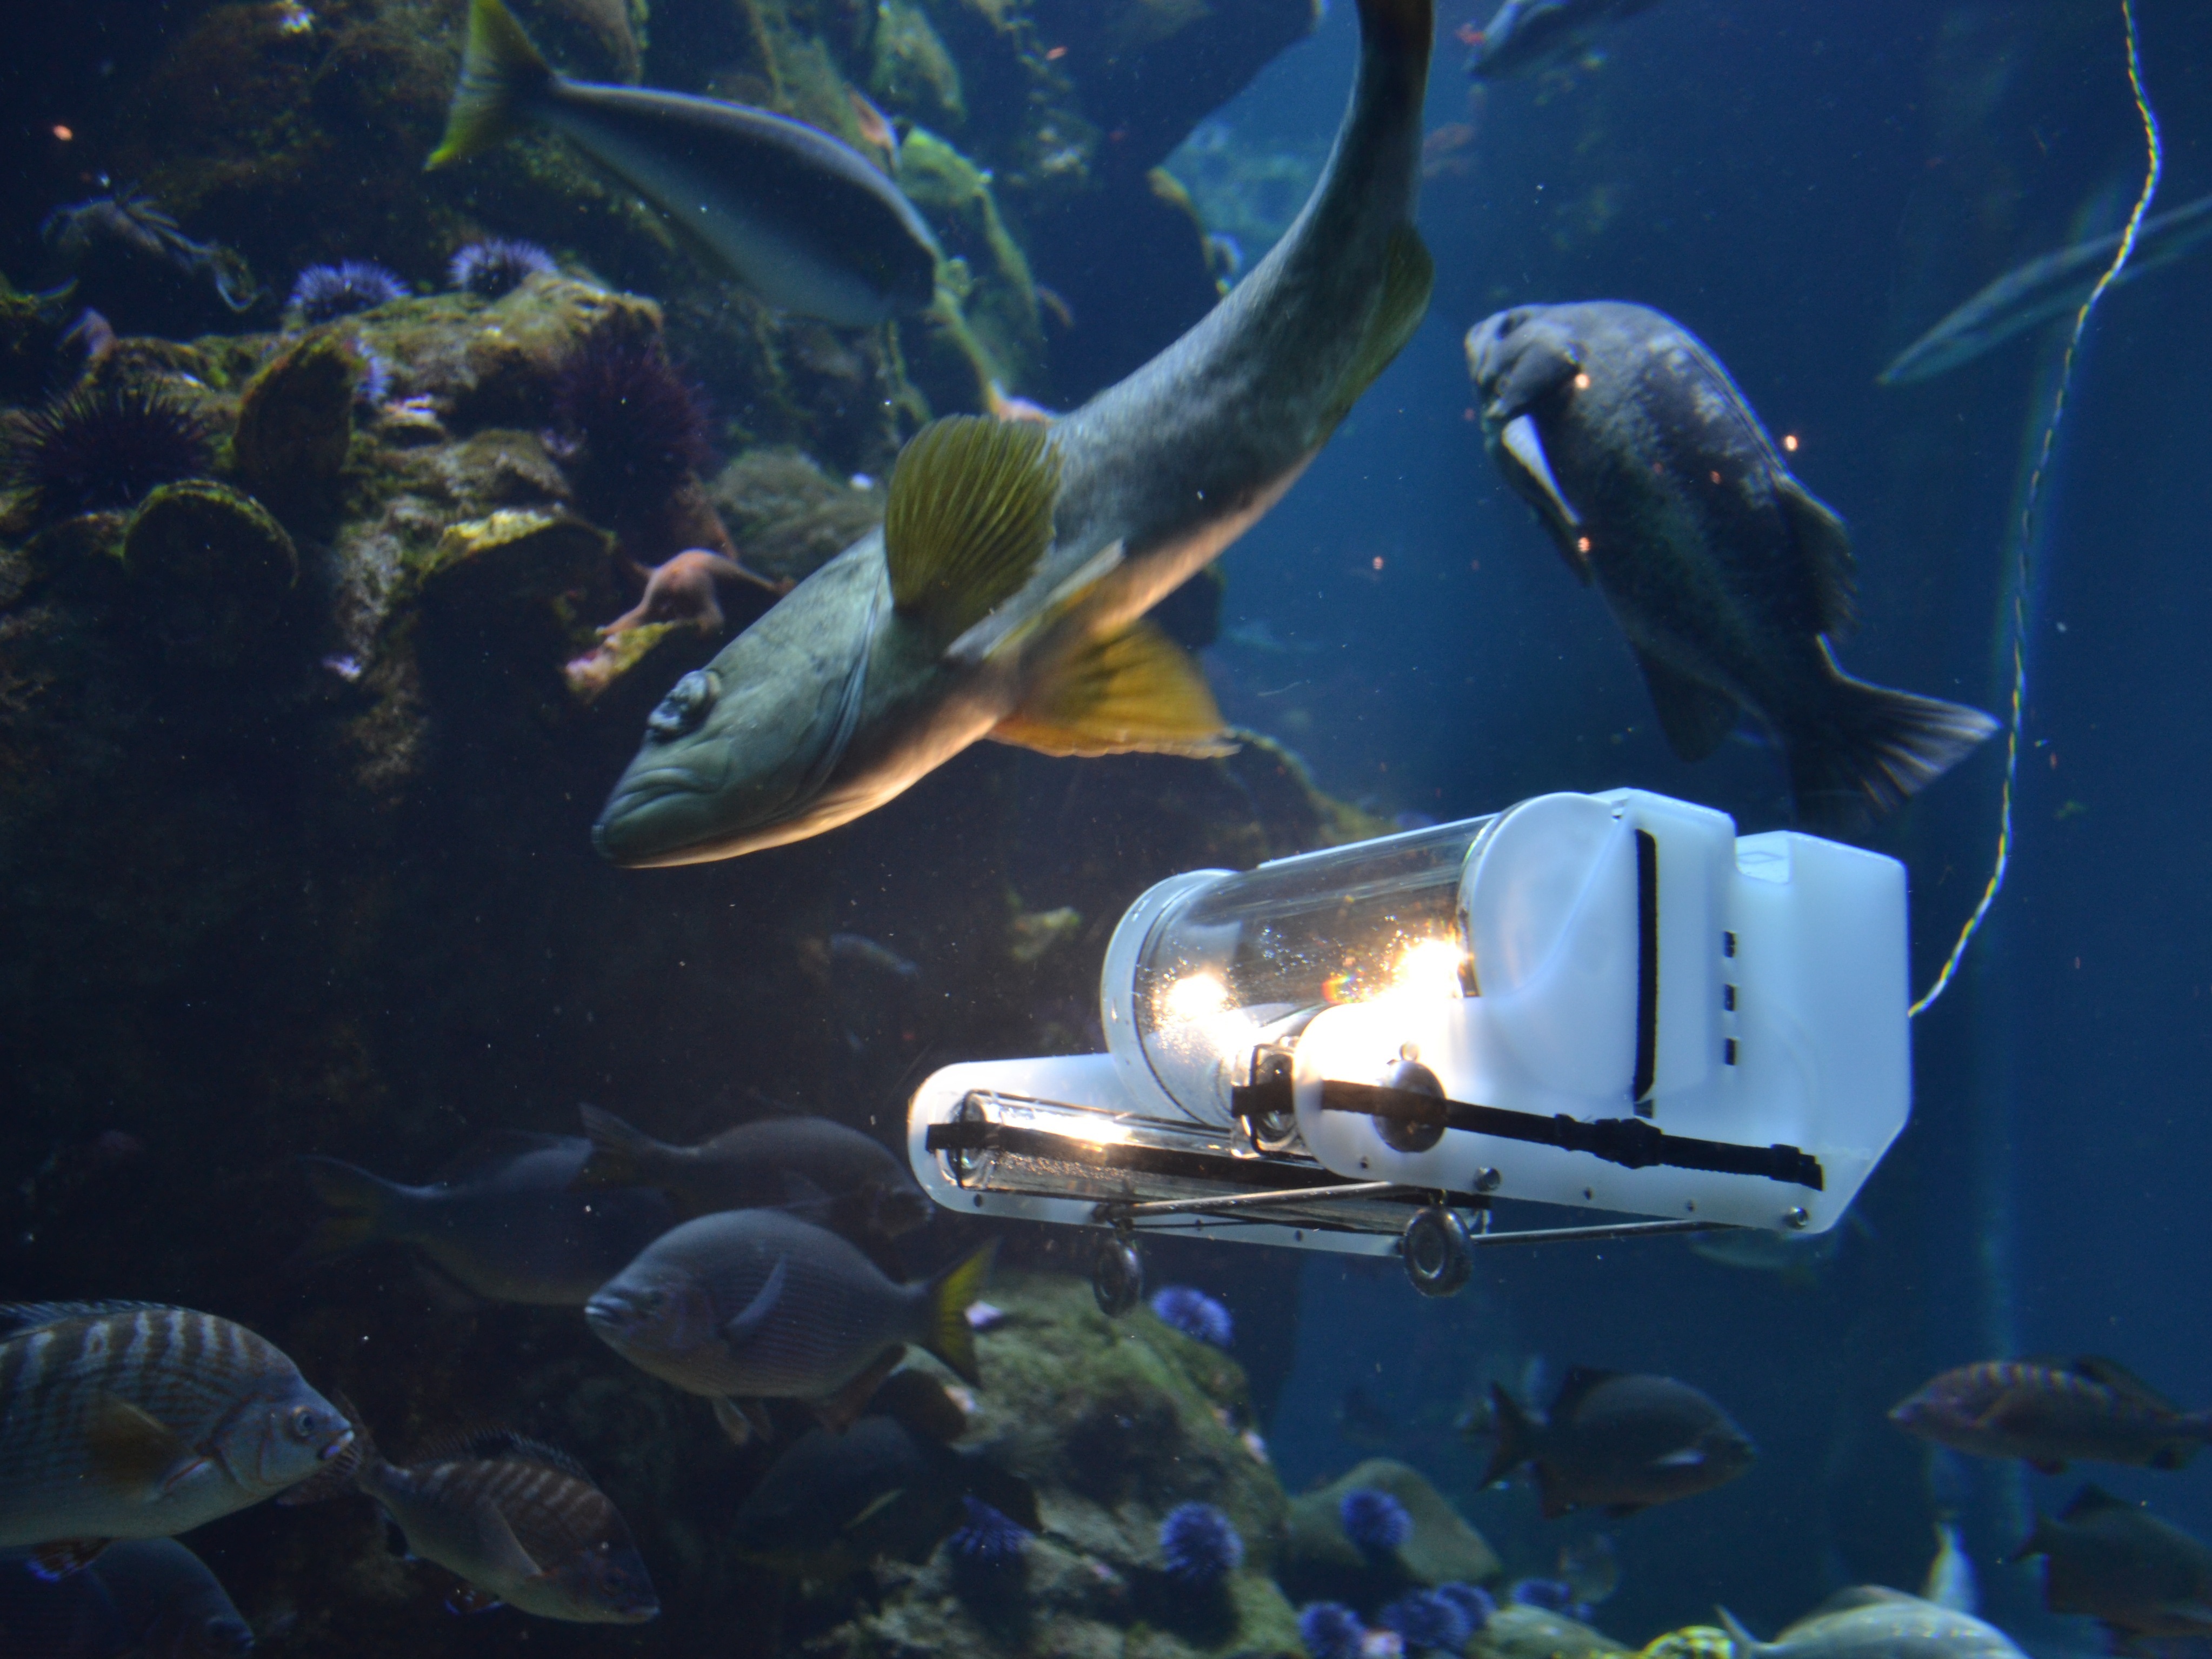 Maker David Lang’s OpenROV -- an open-source, low-cost underwater robot -- makes investigating the mysteries of the ocean accessible to anyone curious and adventurous enough to dive deep.